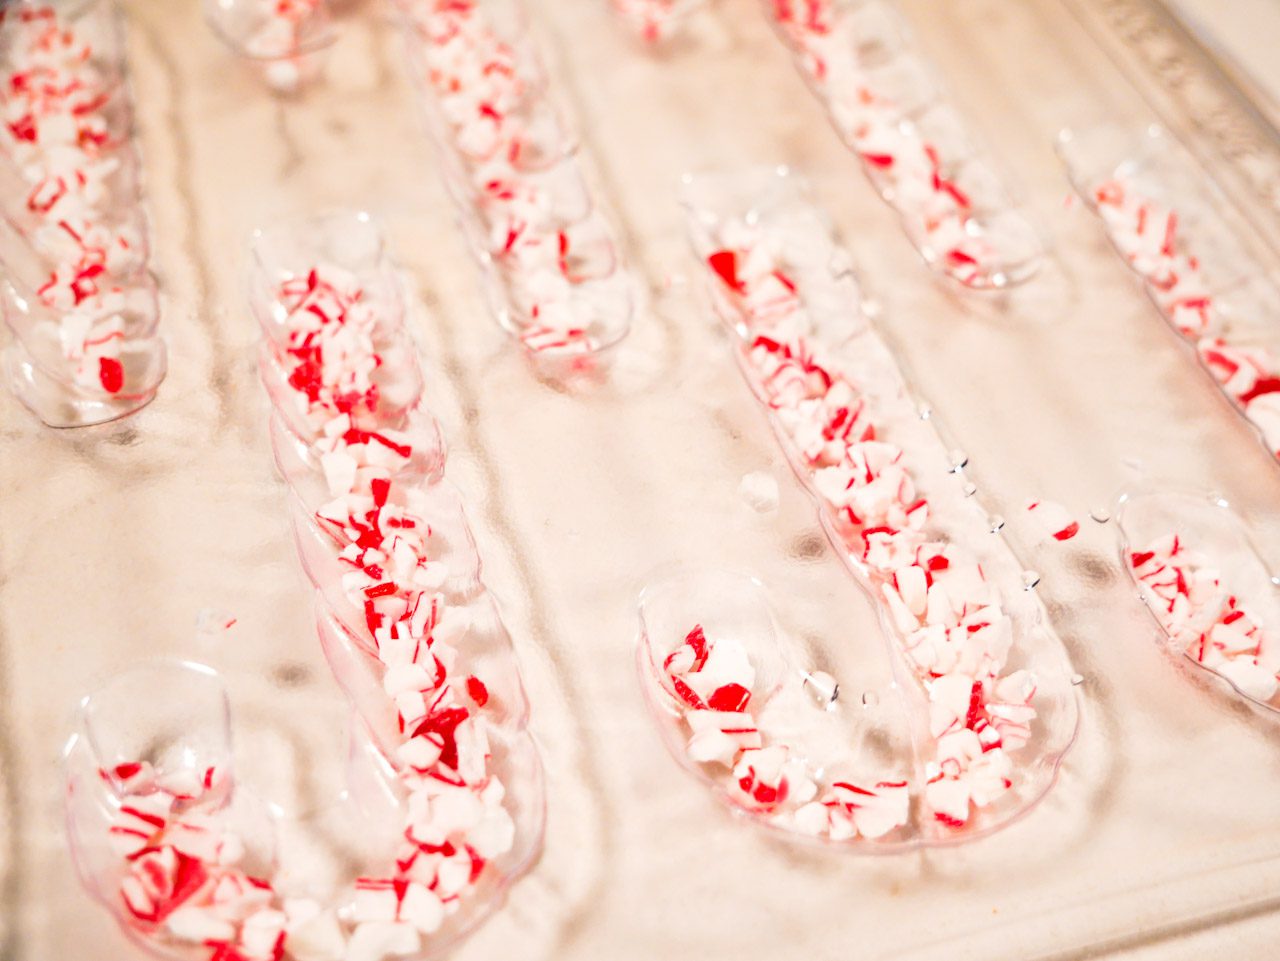 Crushed peppermint in candy cane mold